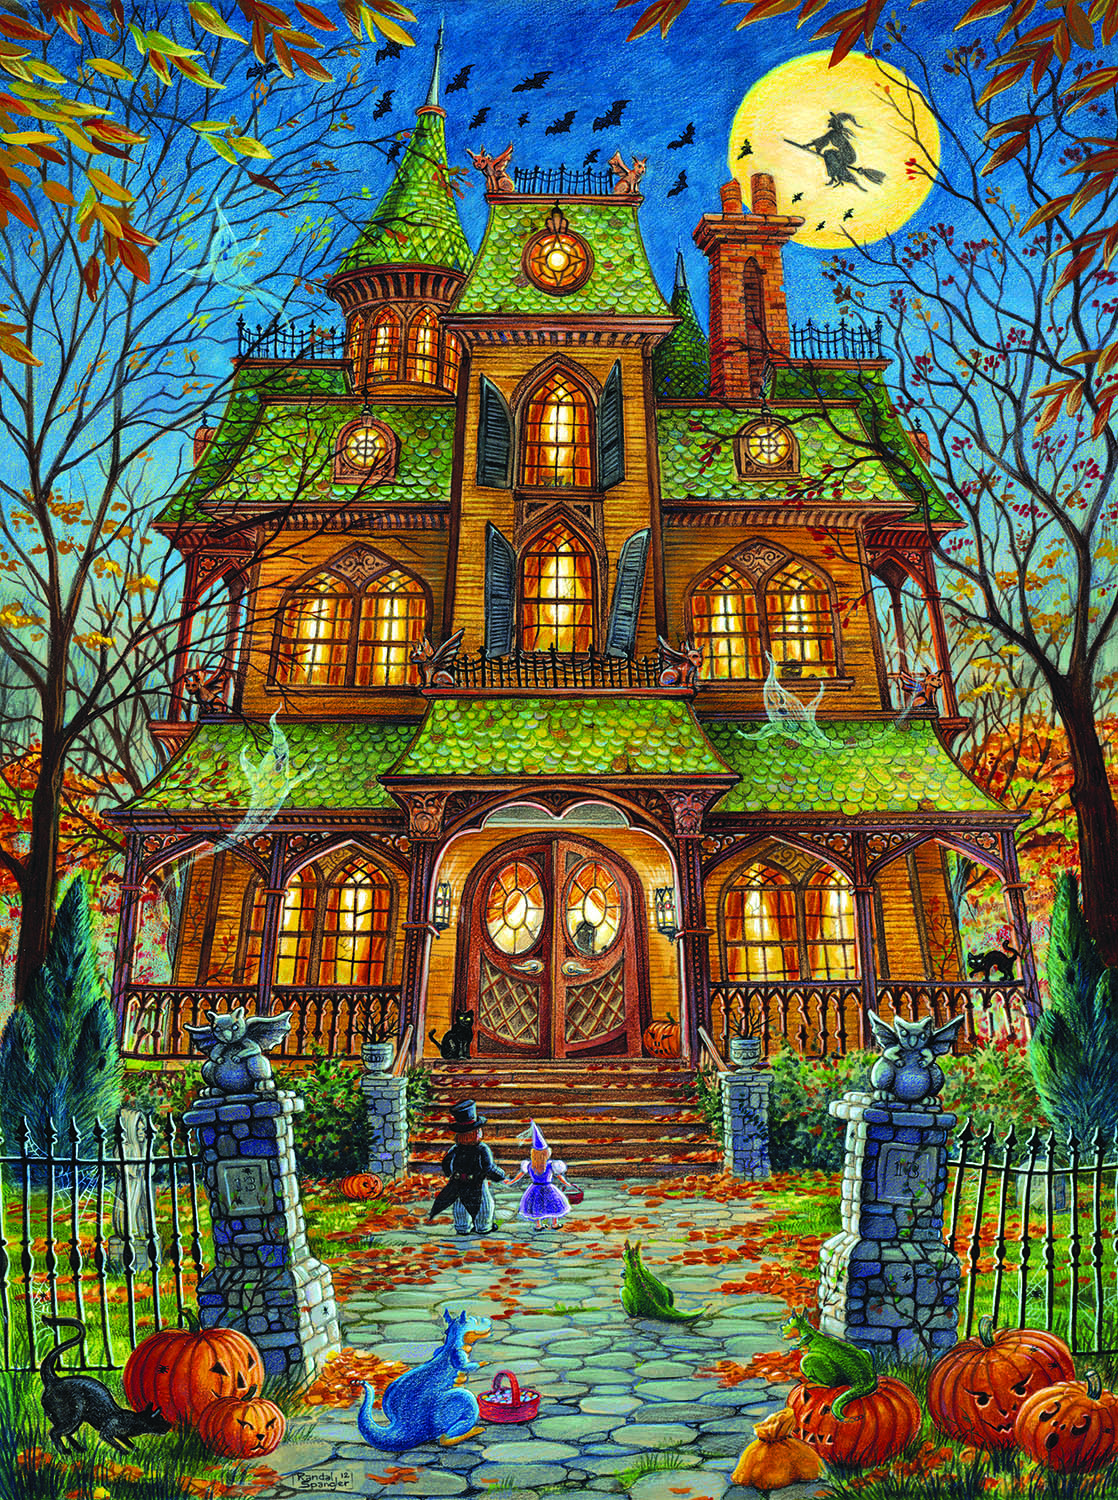 SO-15515 - The Trick or Treat House